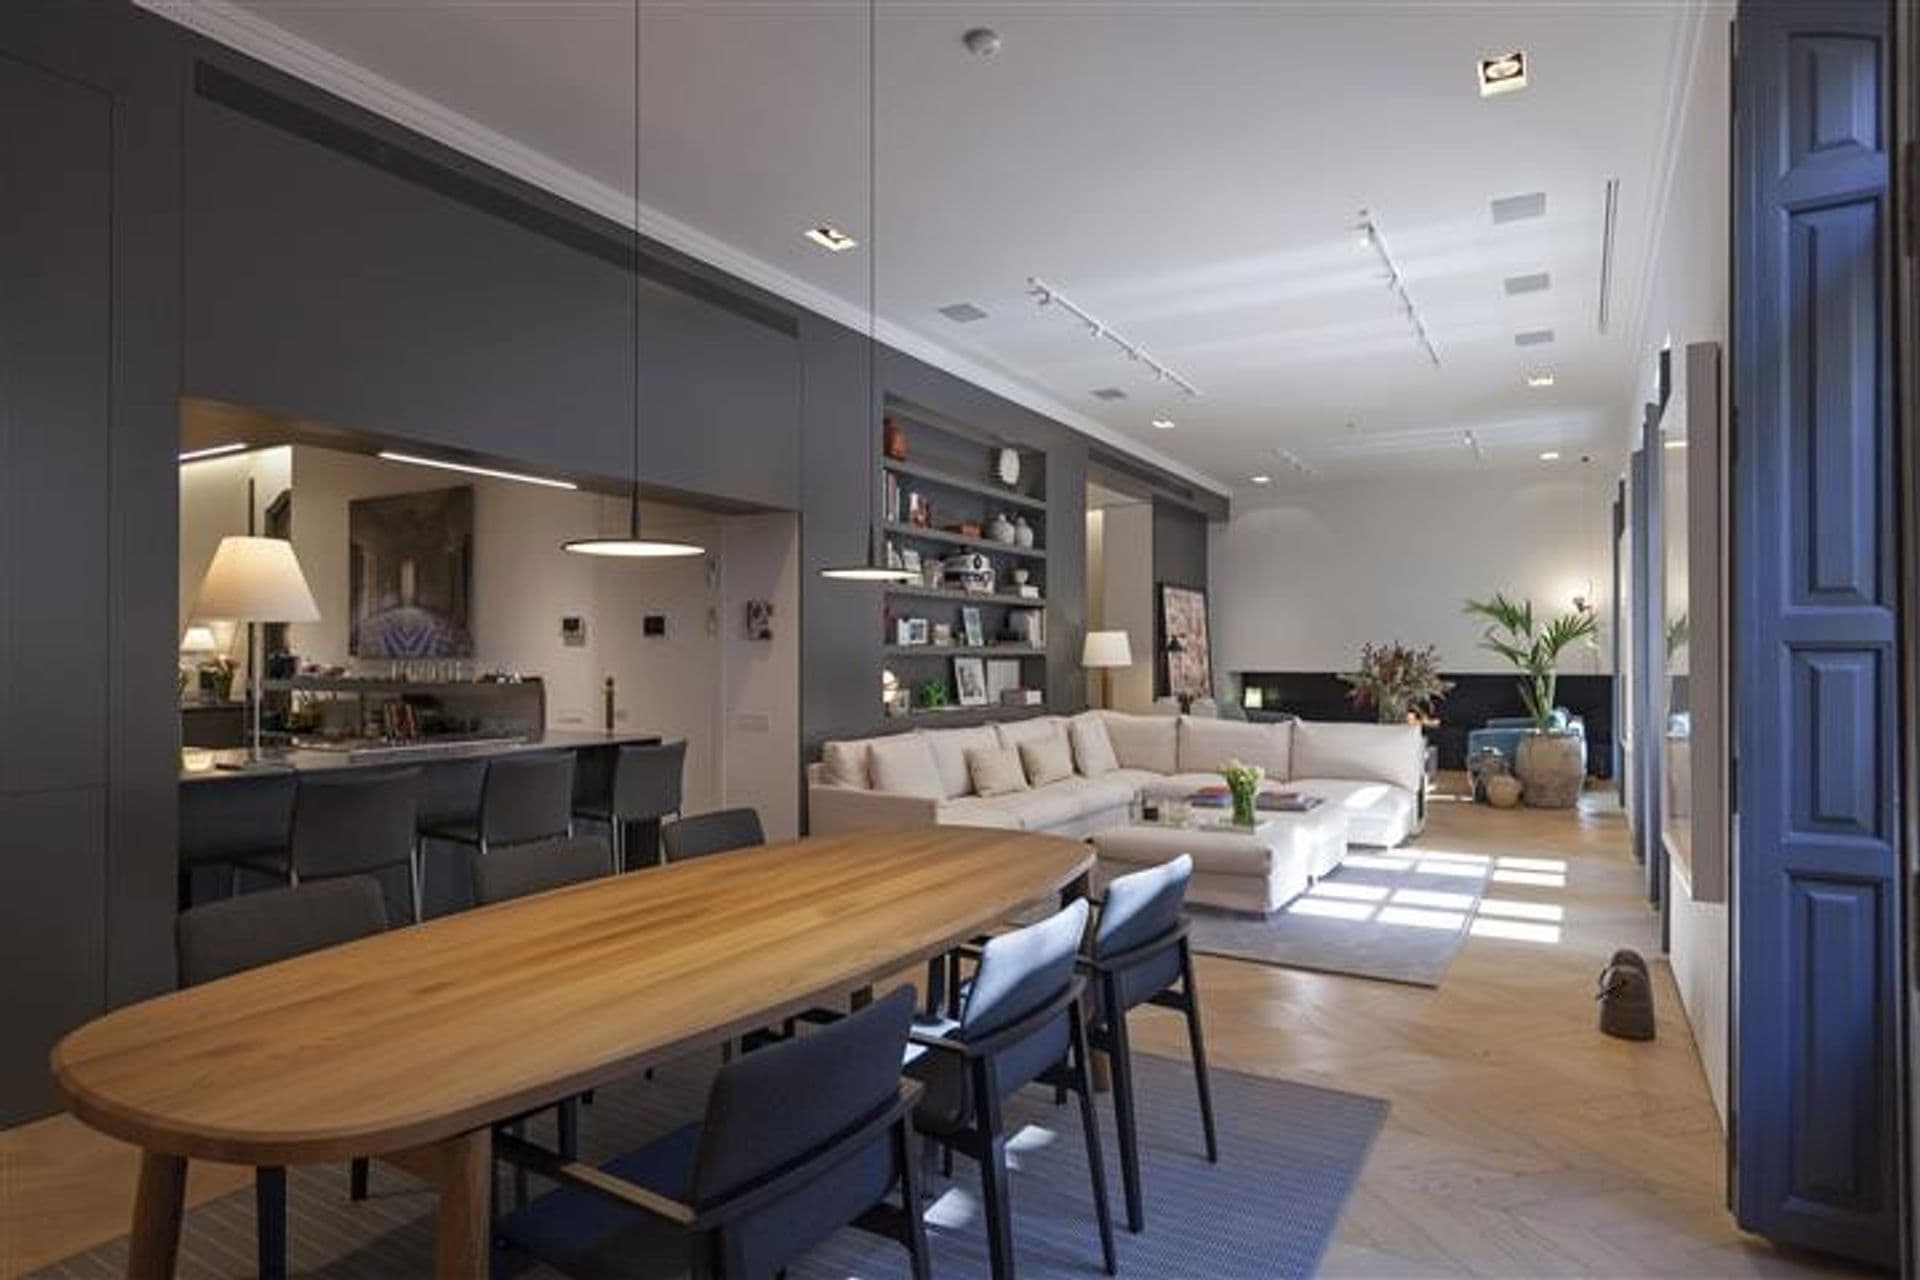 Reformed 345m2 apartment in the centre of Eixample, Valencia.